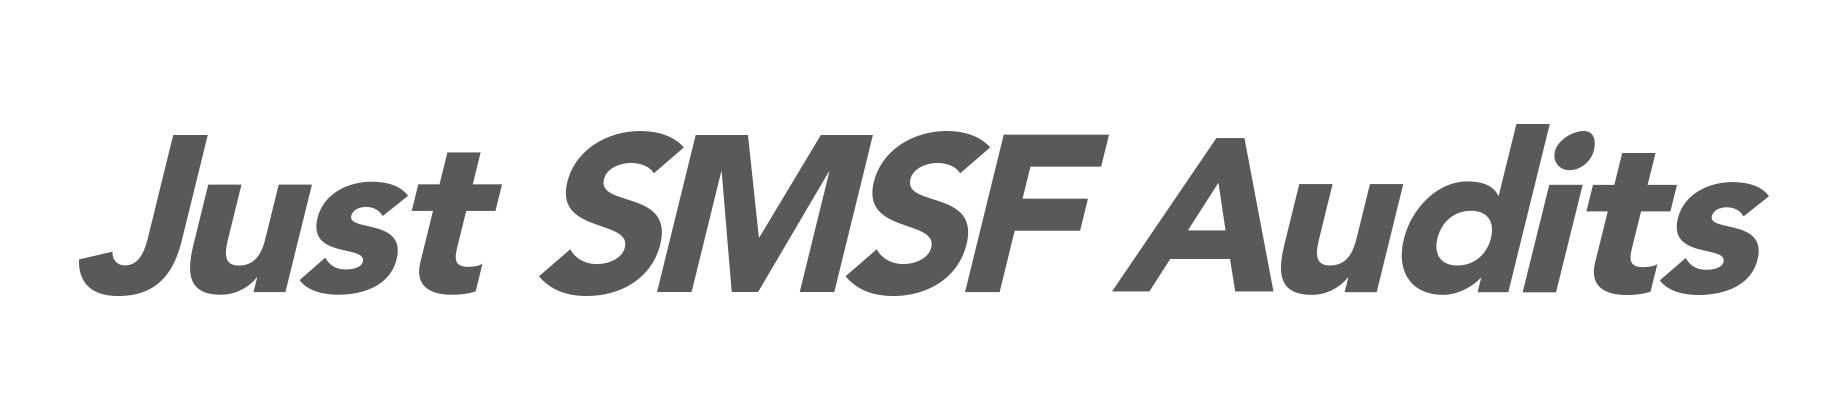 Just SMSF Audits logo